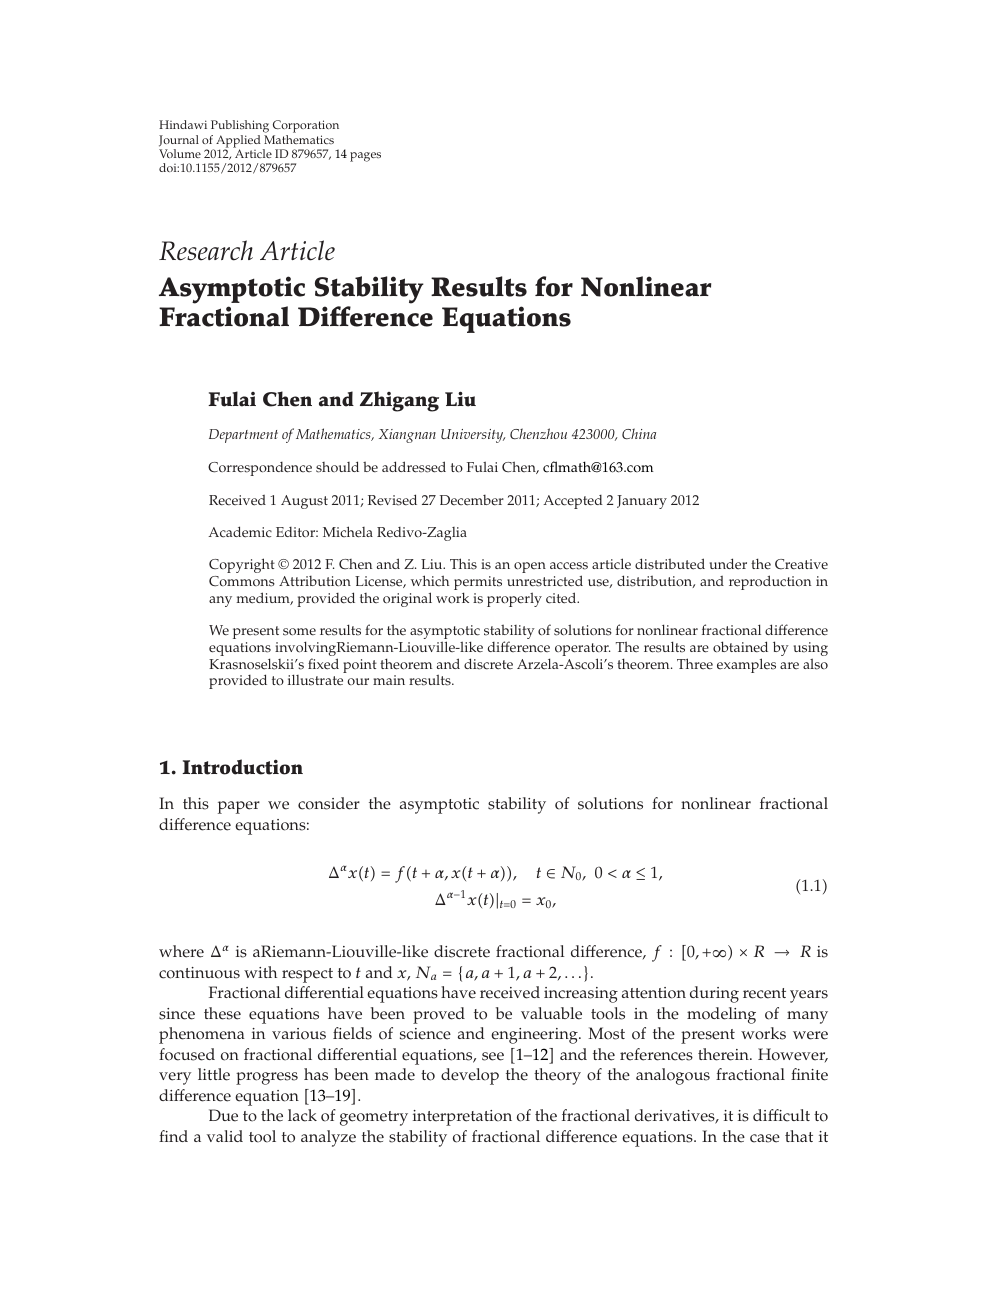 Asymptotic Stability Results For Nonlinear Fractional Difference Equations Topic Of Research Paper In Mathematics Download Scholarly Article Pdf And Read For Free On Cyberleninka Open Science Hub